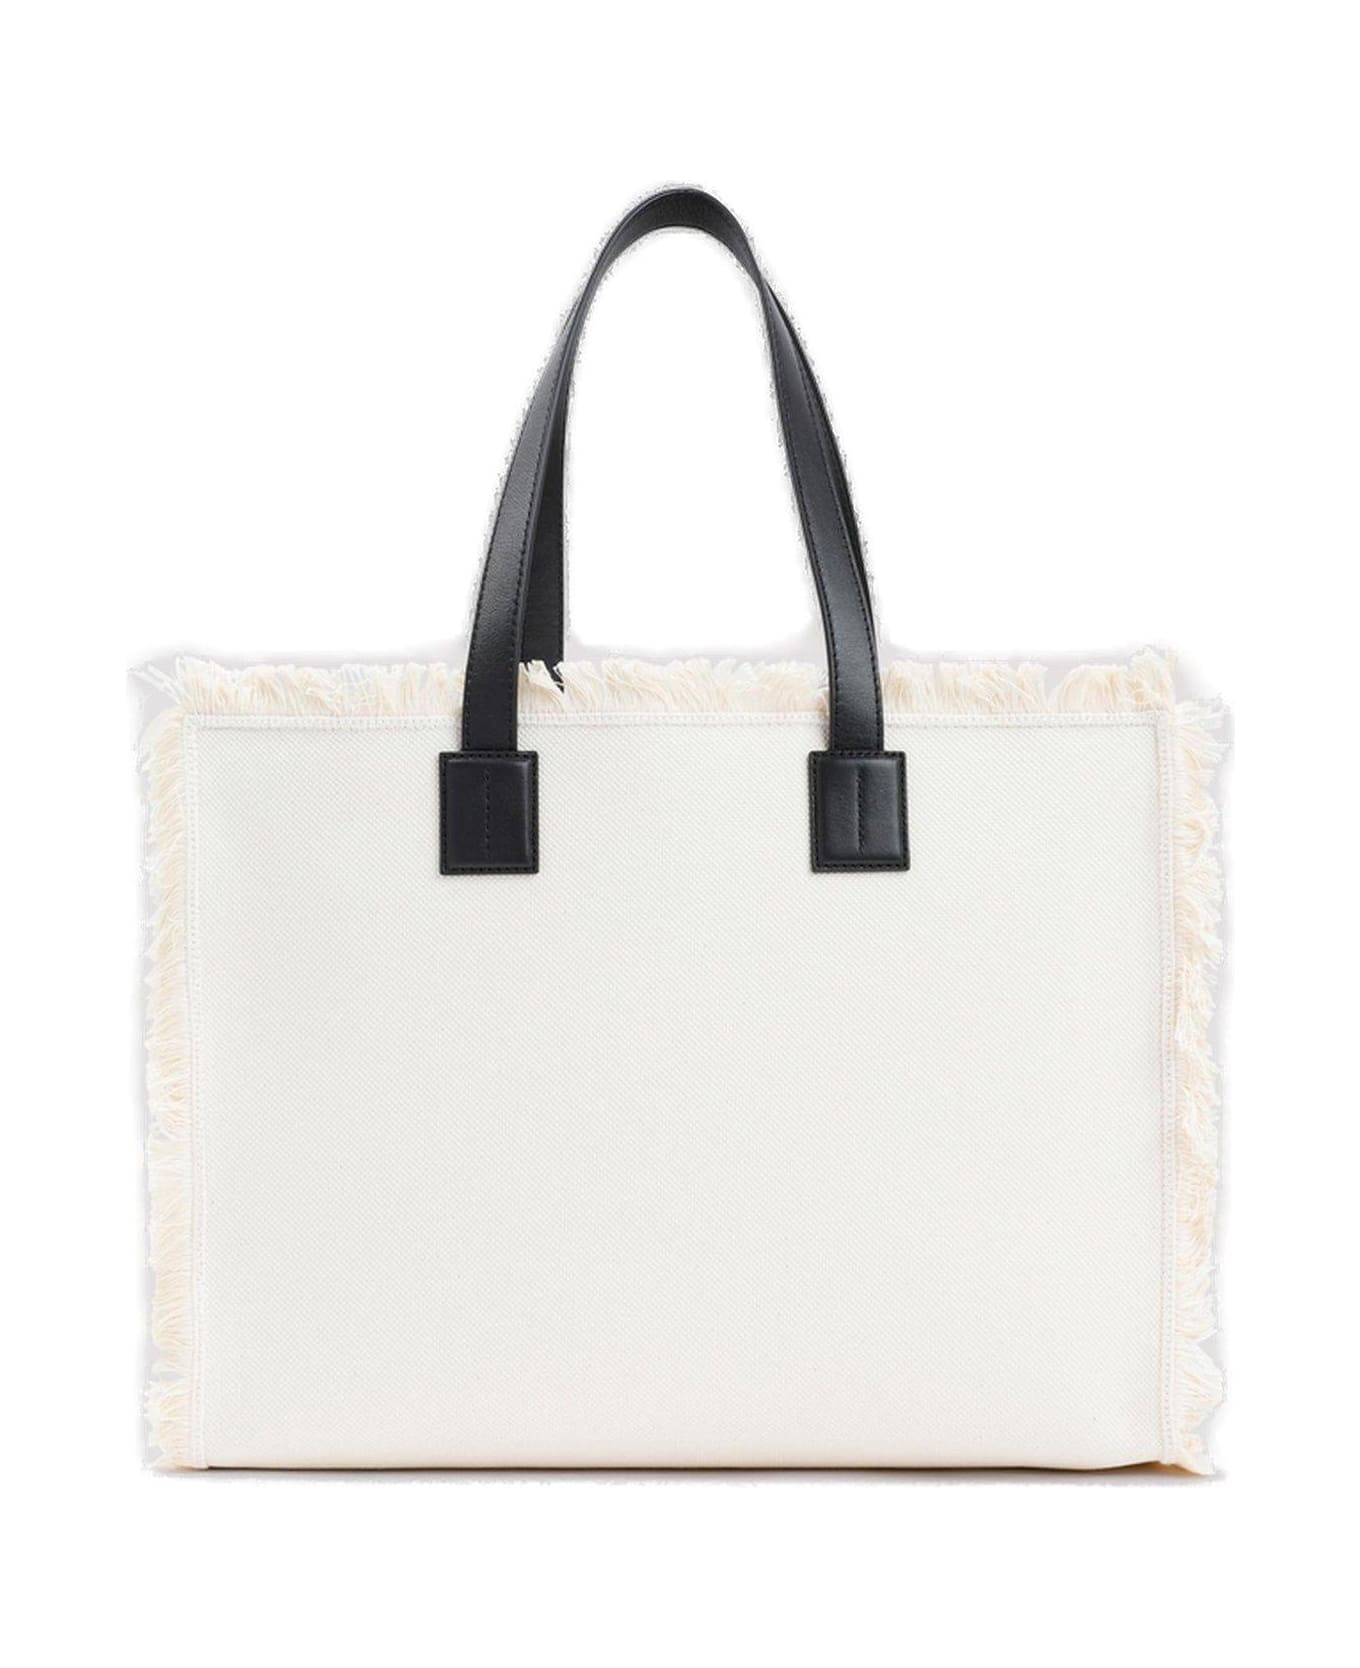 Bally Logo Embroidered Fringed Tote Bag - Beige